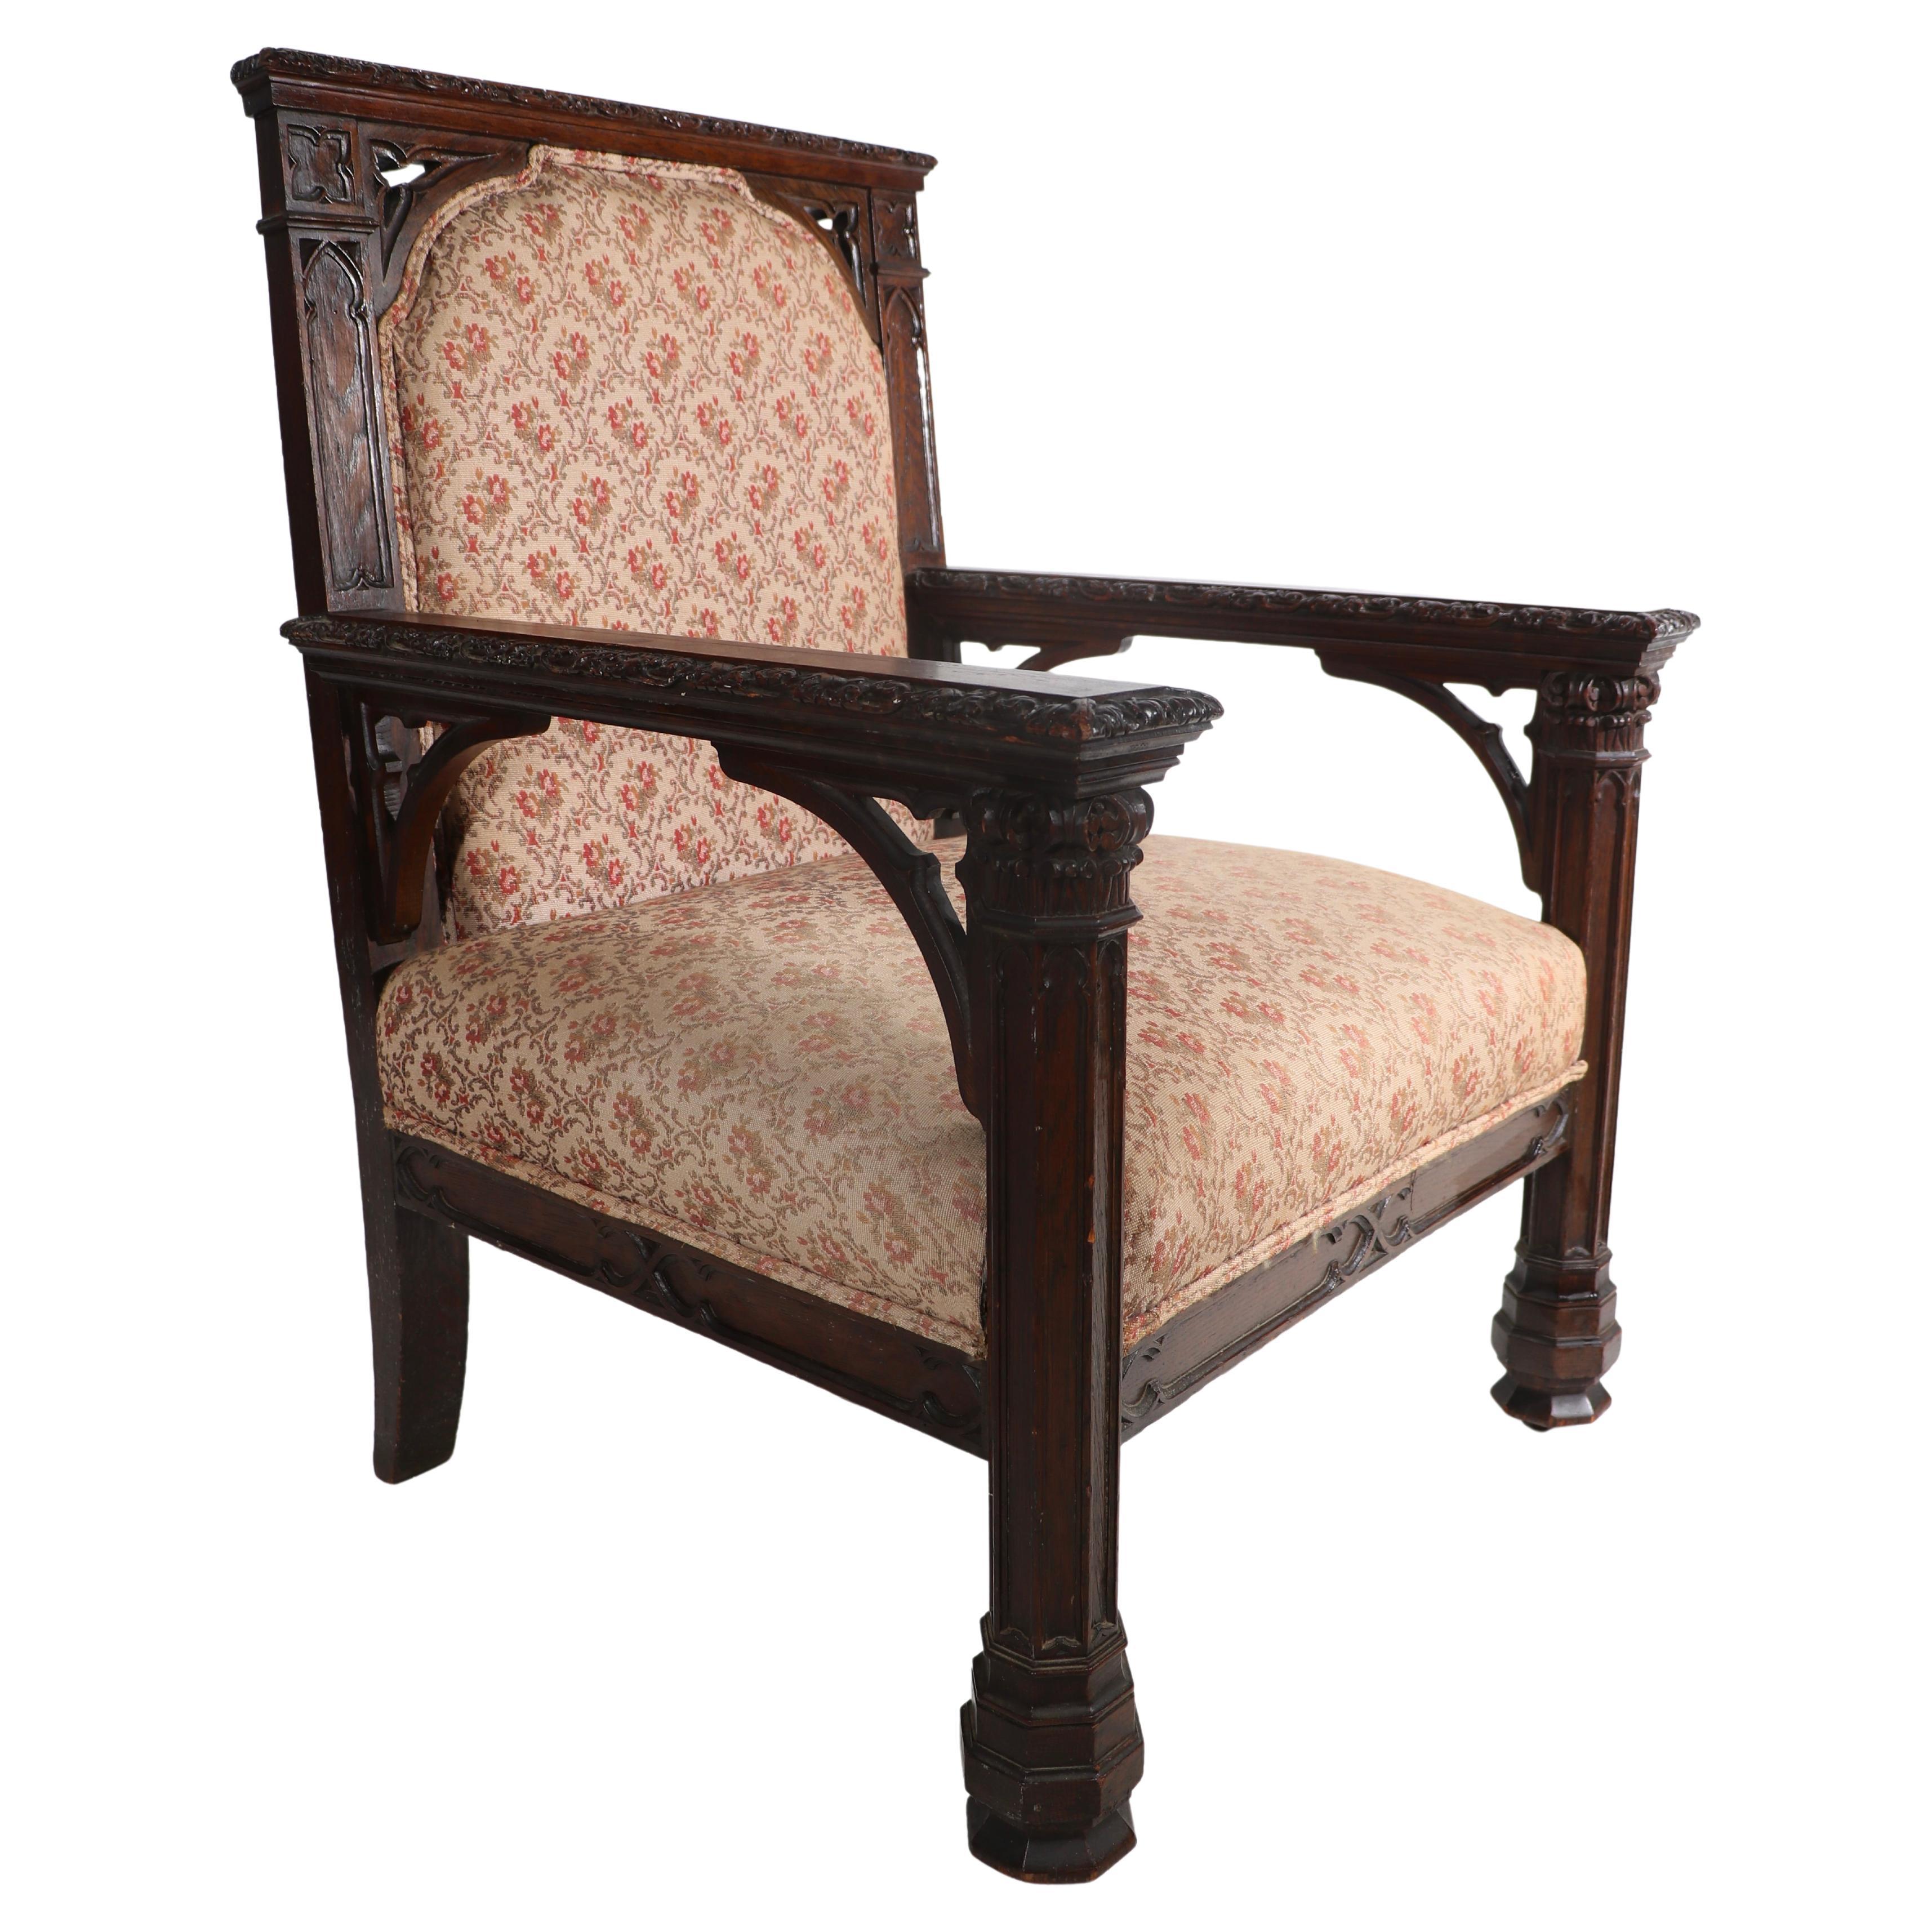 Oversized Gothic Revival Throne Armchair For Sale